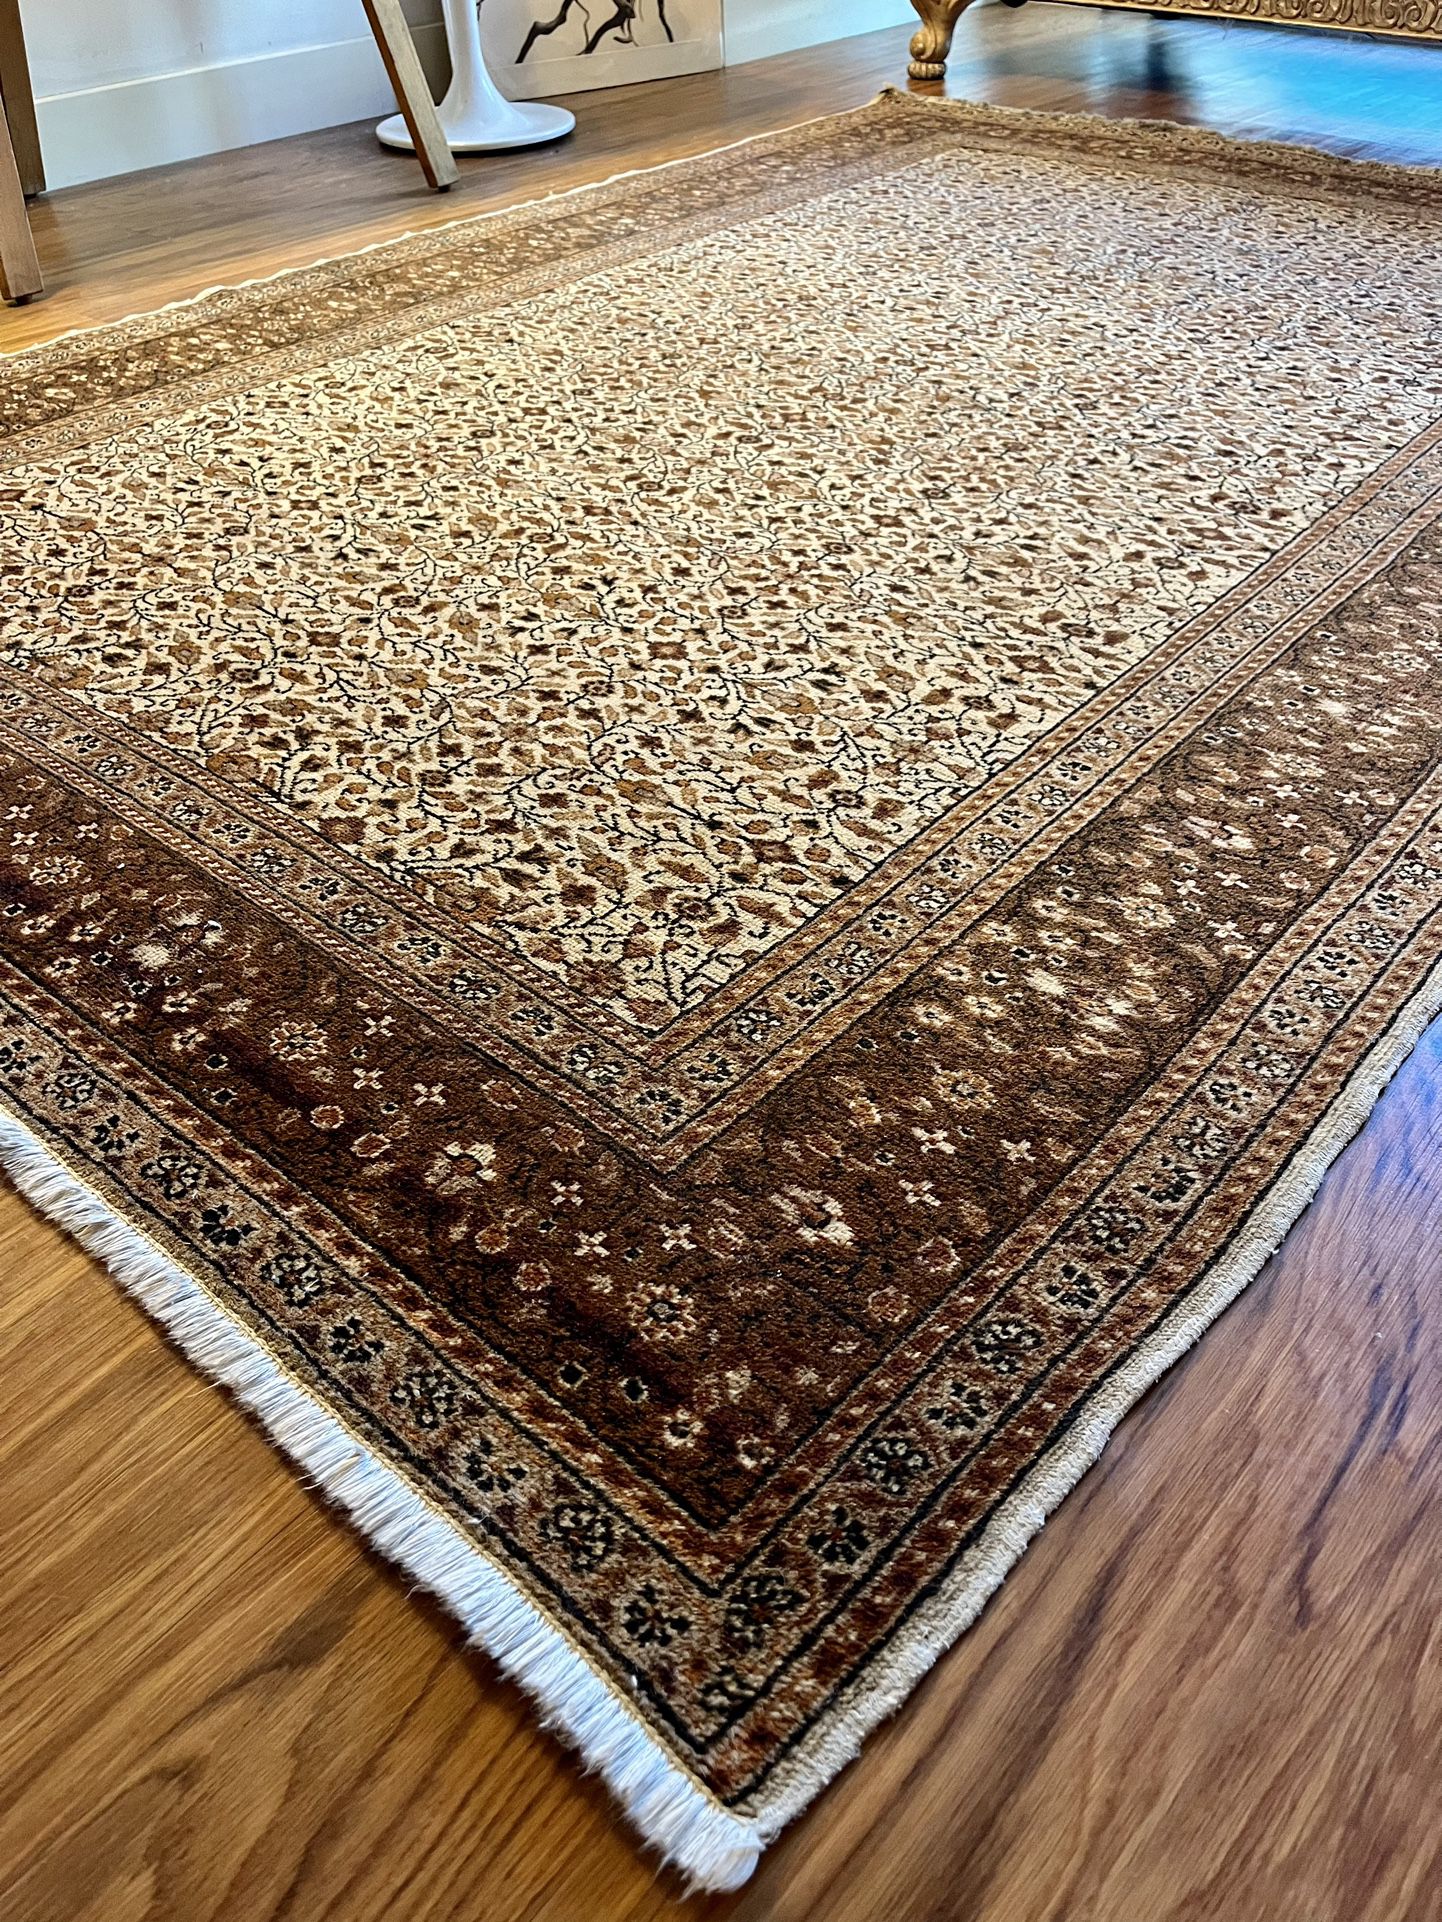 🚛 Free Delivery 🎻 Classical Brown Area Rug 🎻